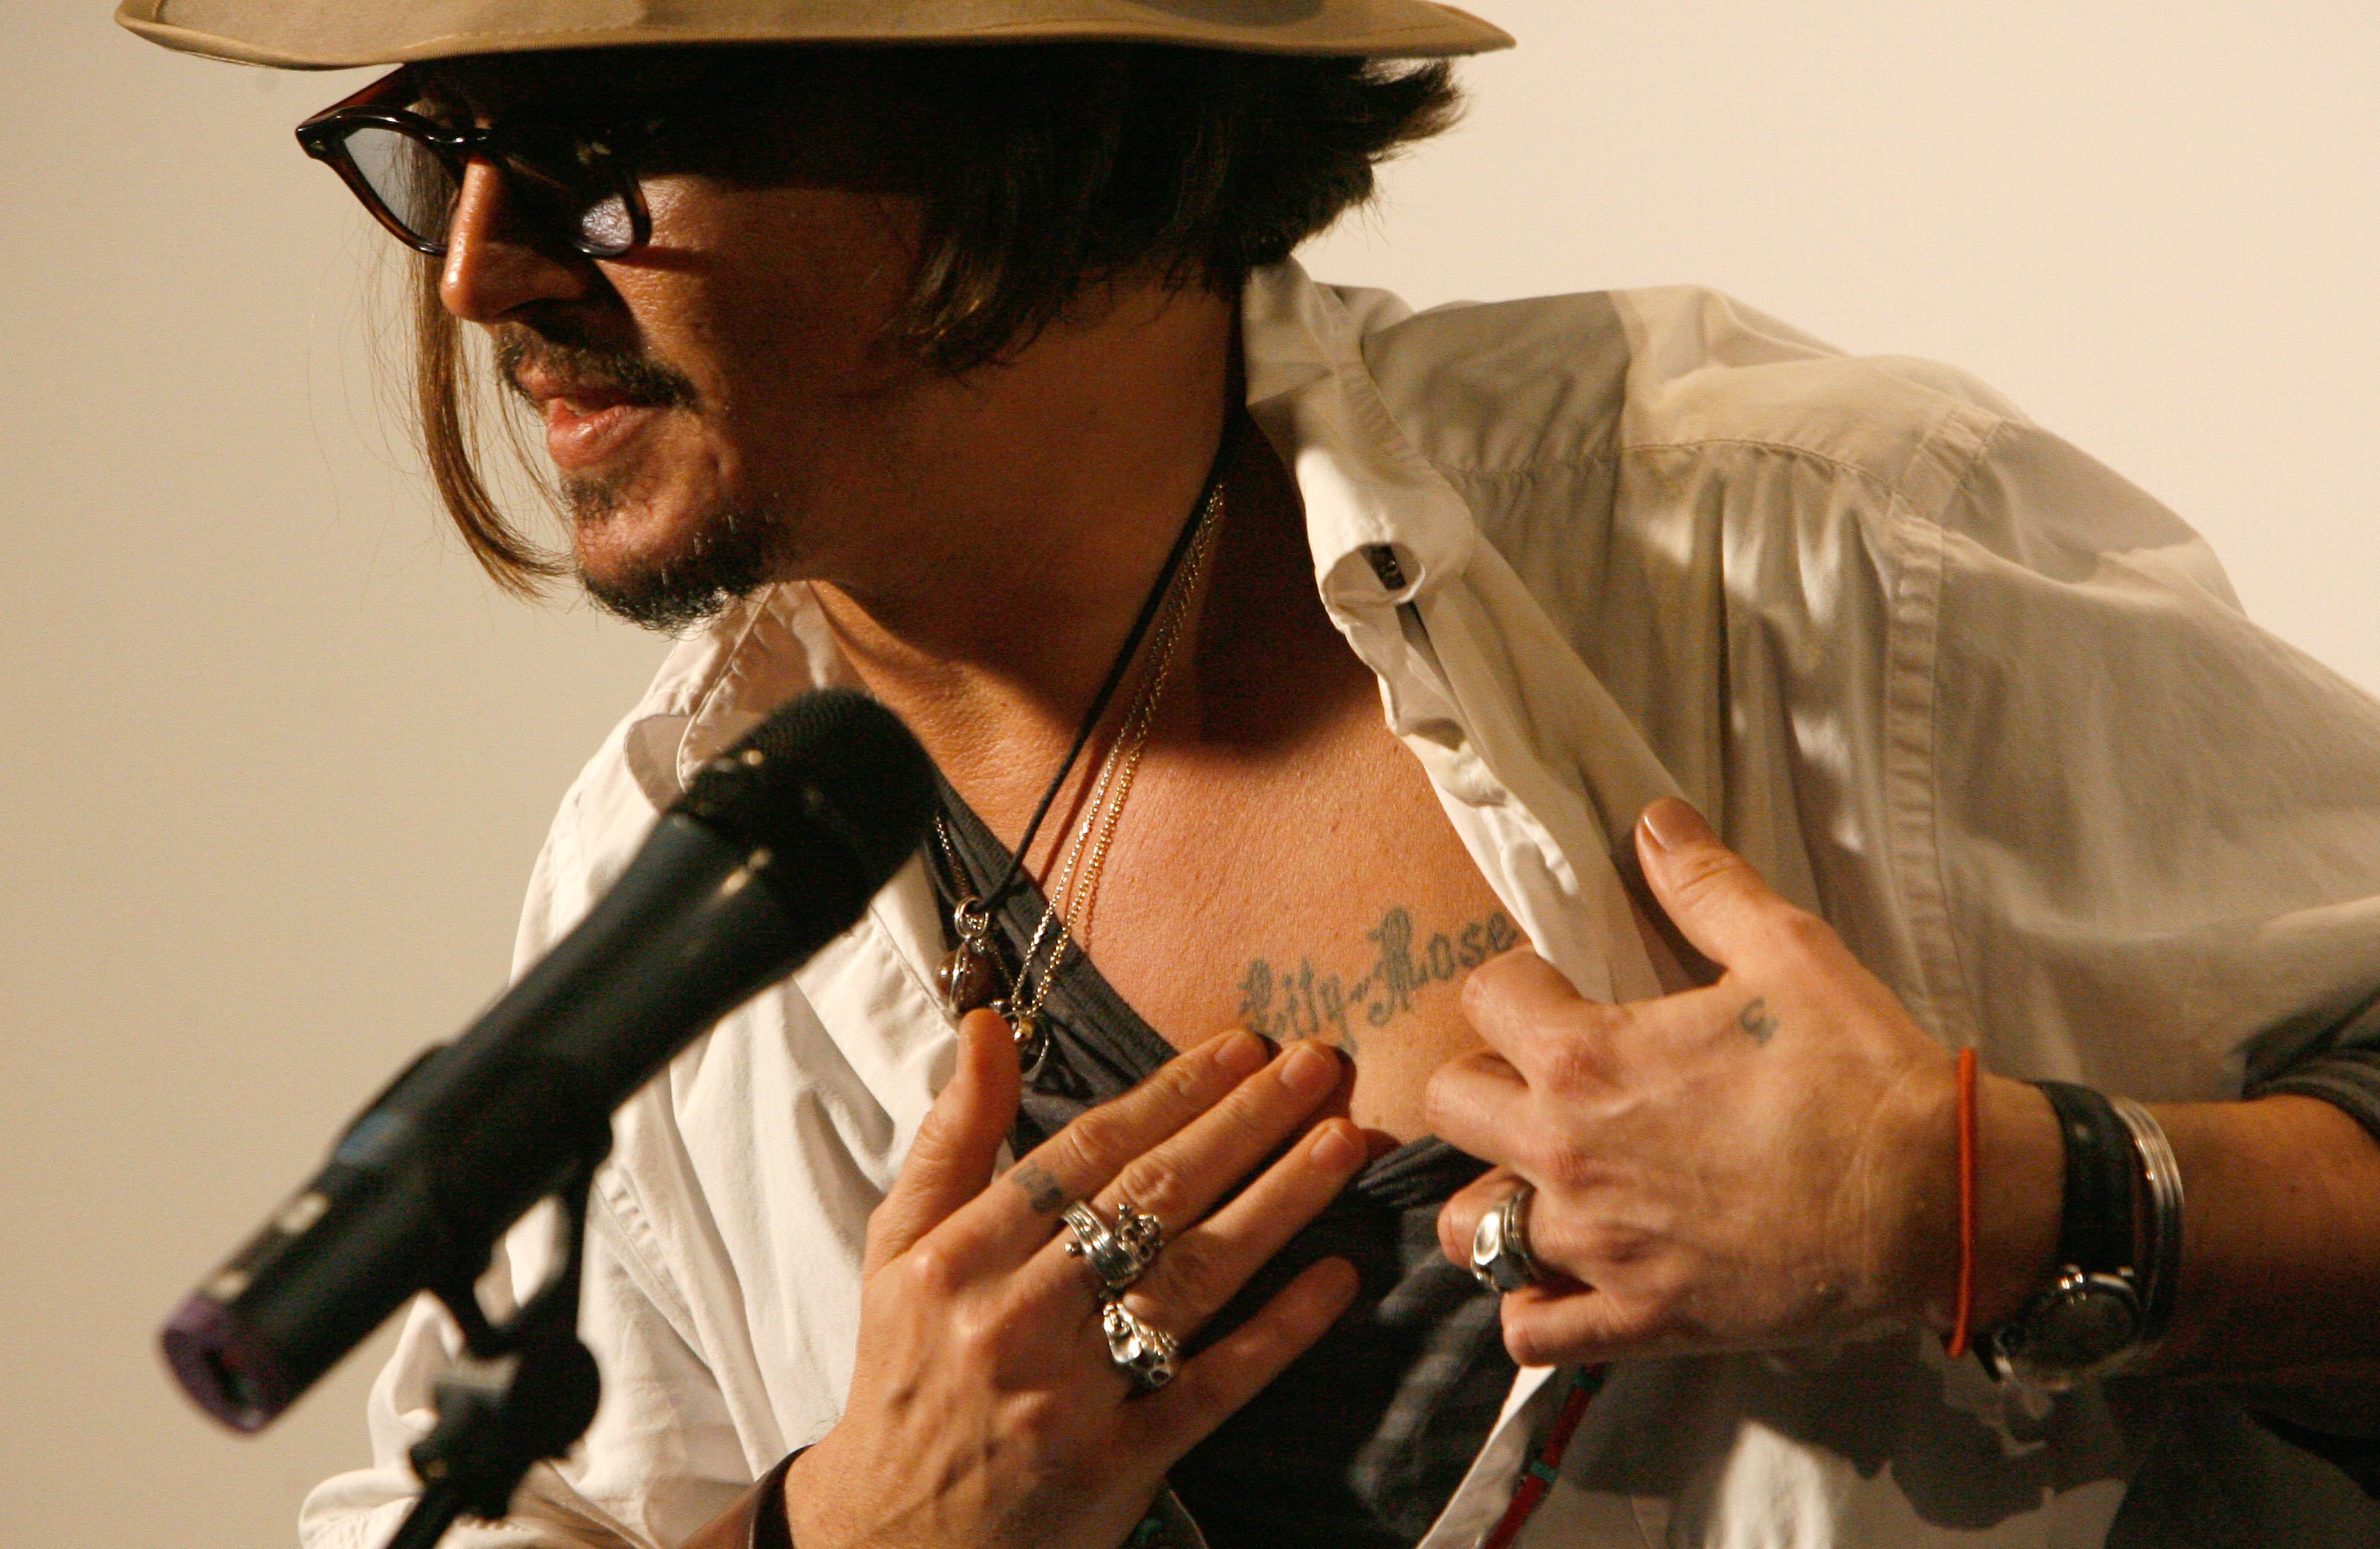 Johnny Depp at a press conference during the Kustendorf music & film festival, day 2 on January 14, 2010 in Belgrade, Serbia. | Source: Getty Images